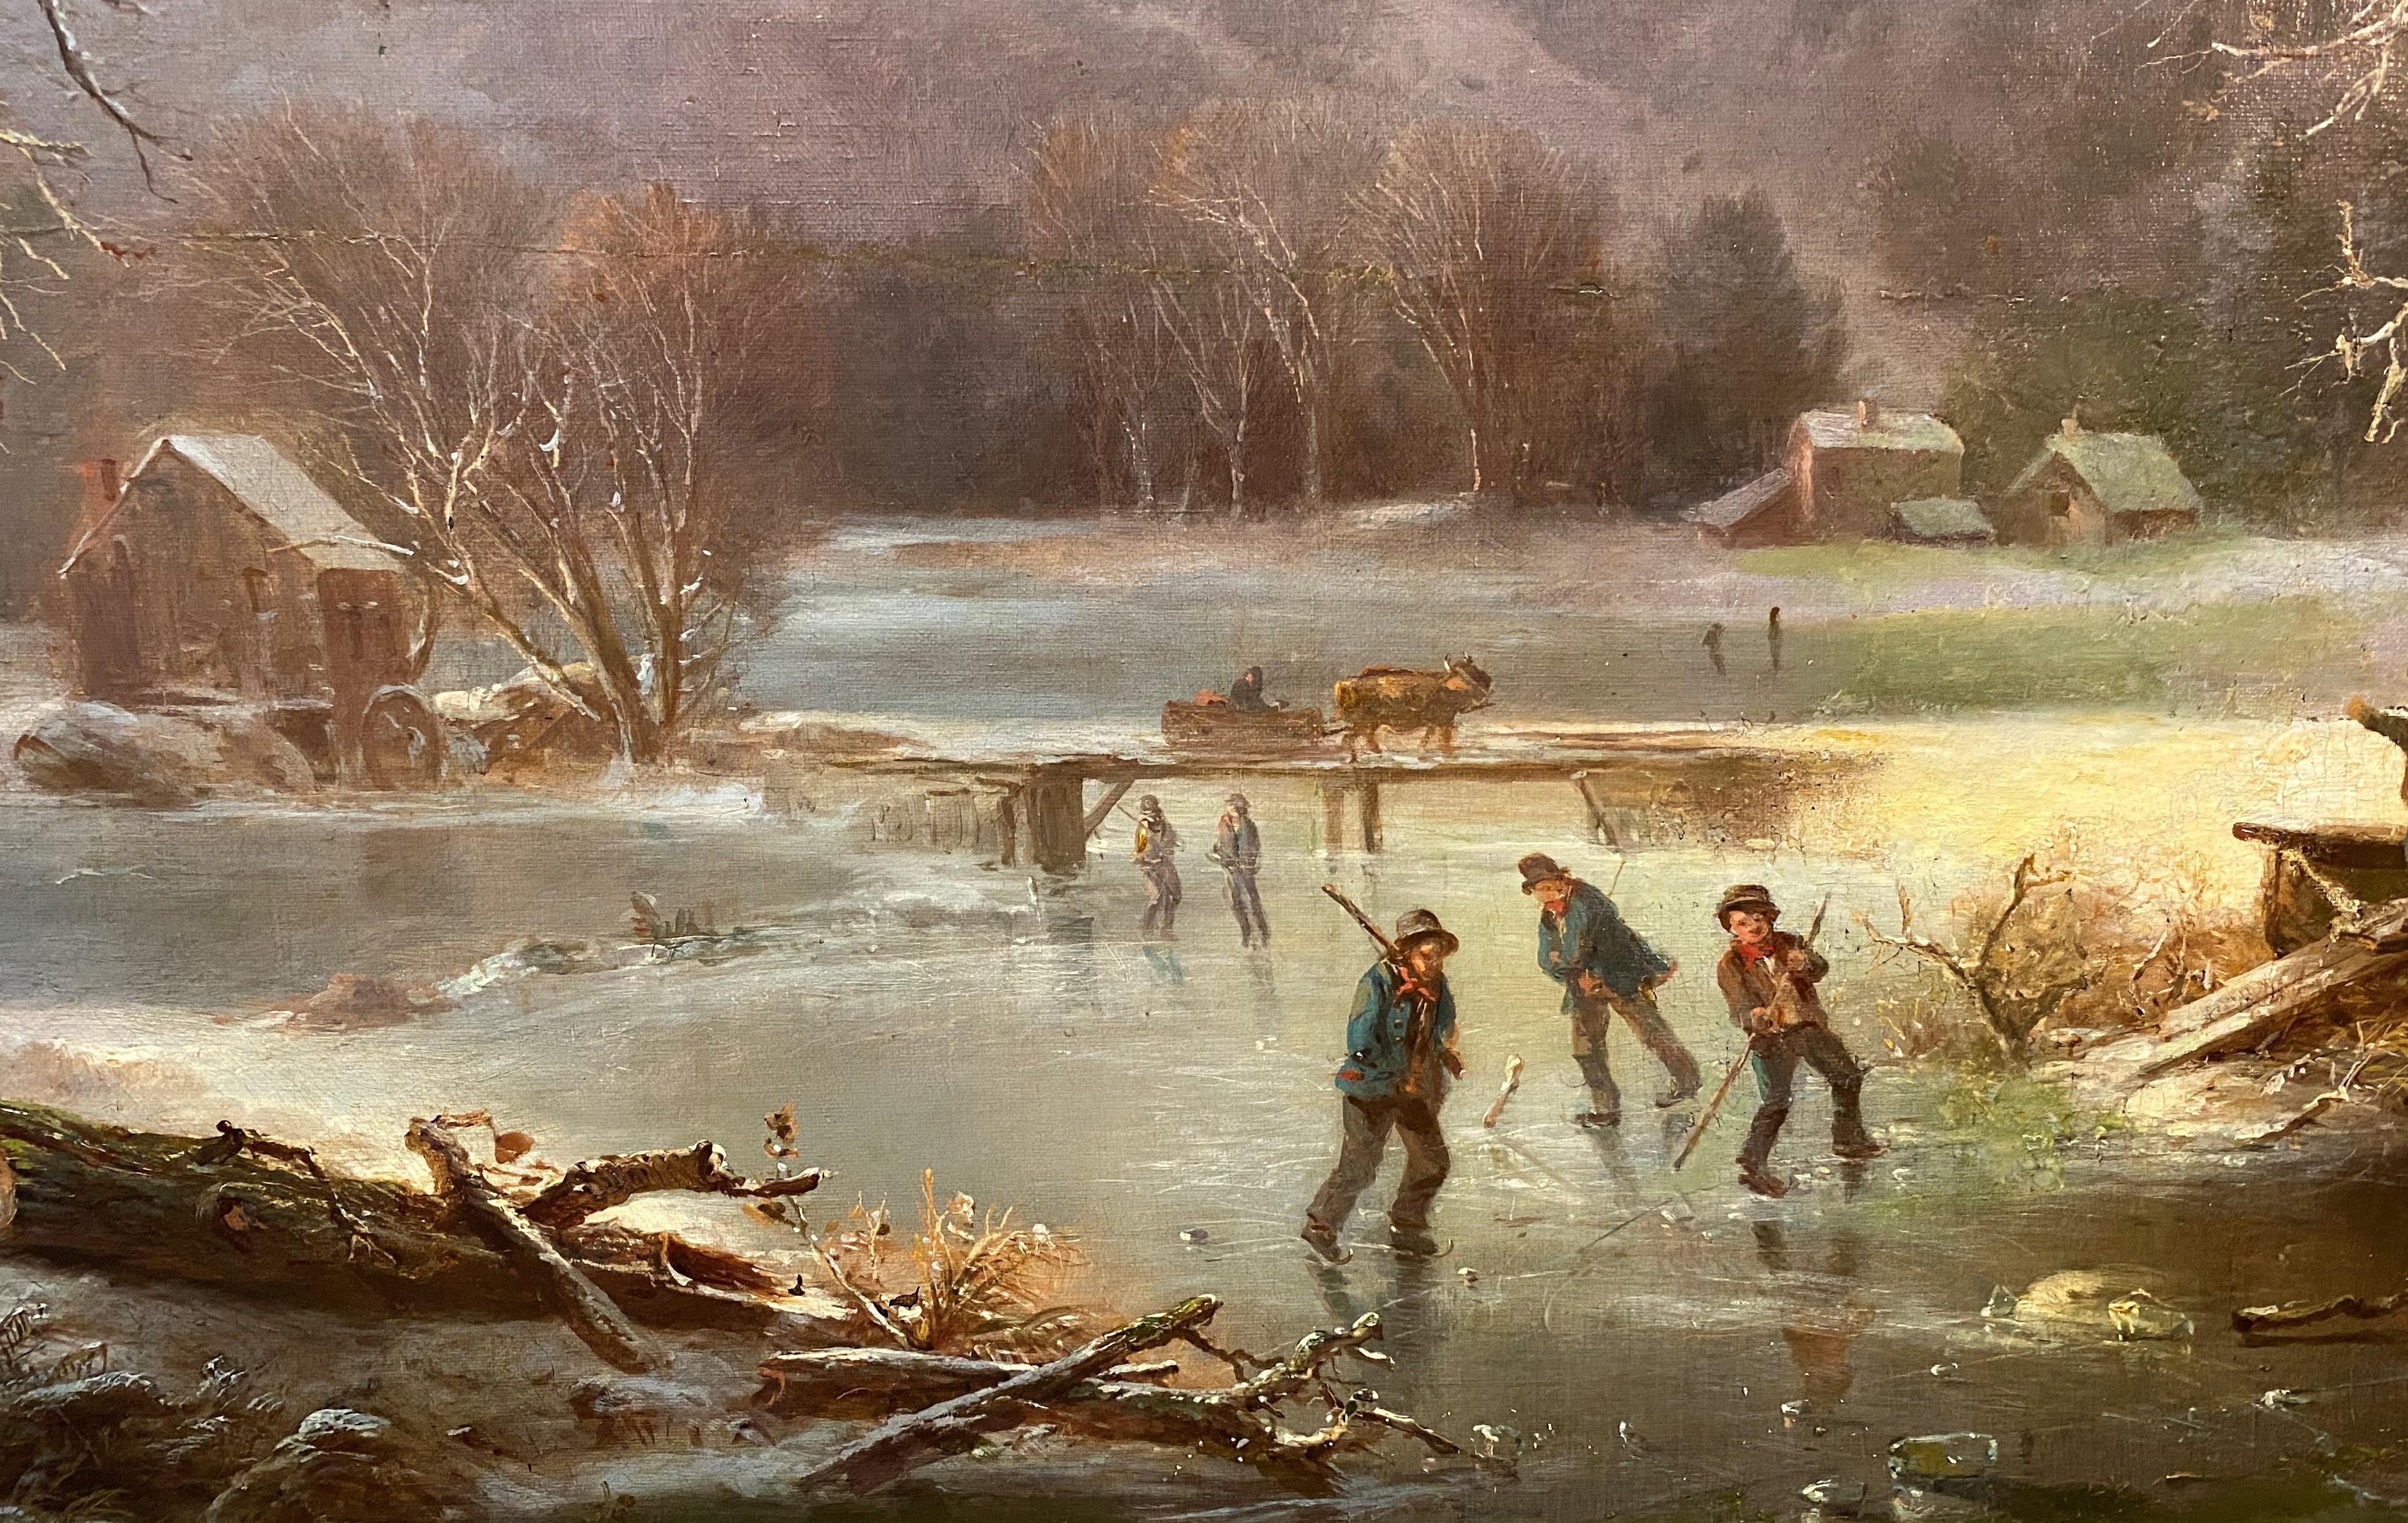 Winter Landscape with a Skating Scene - American Impressionist Painting by Régis François Gignoux